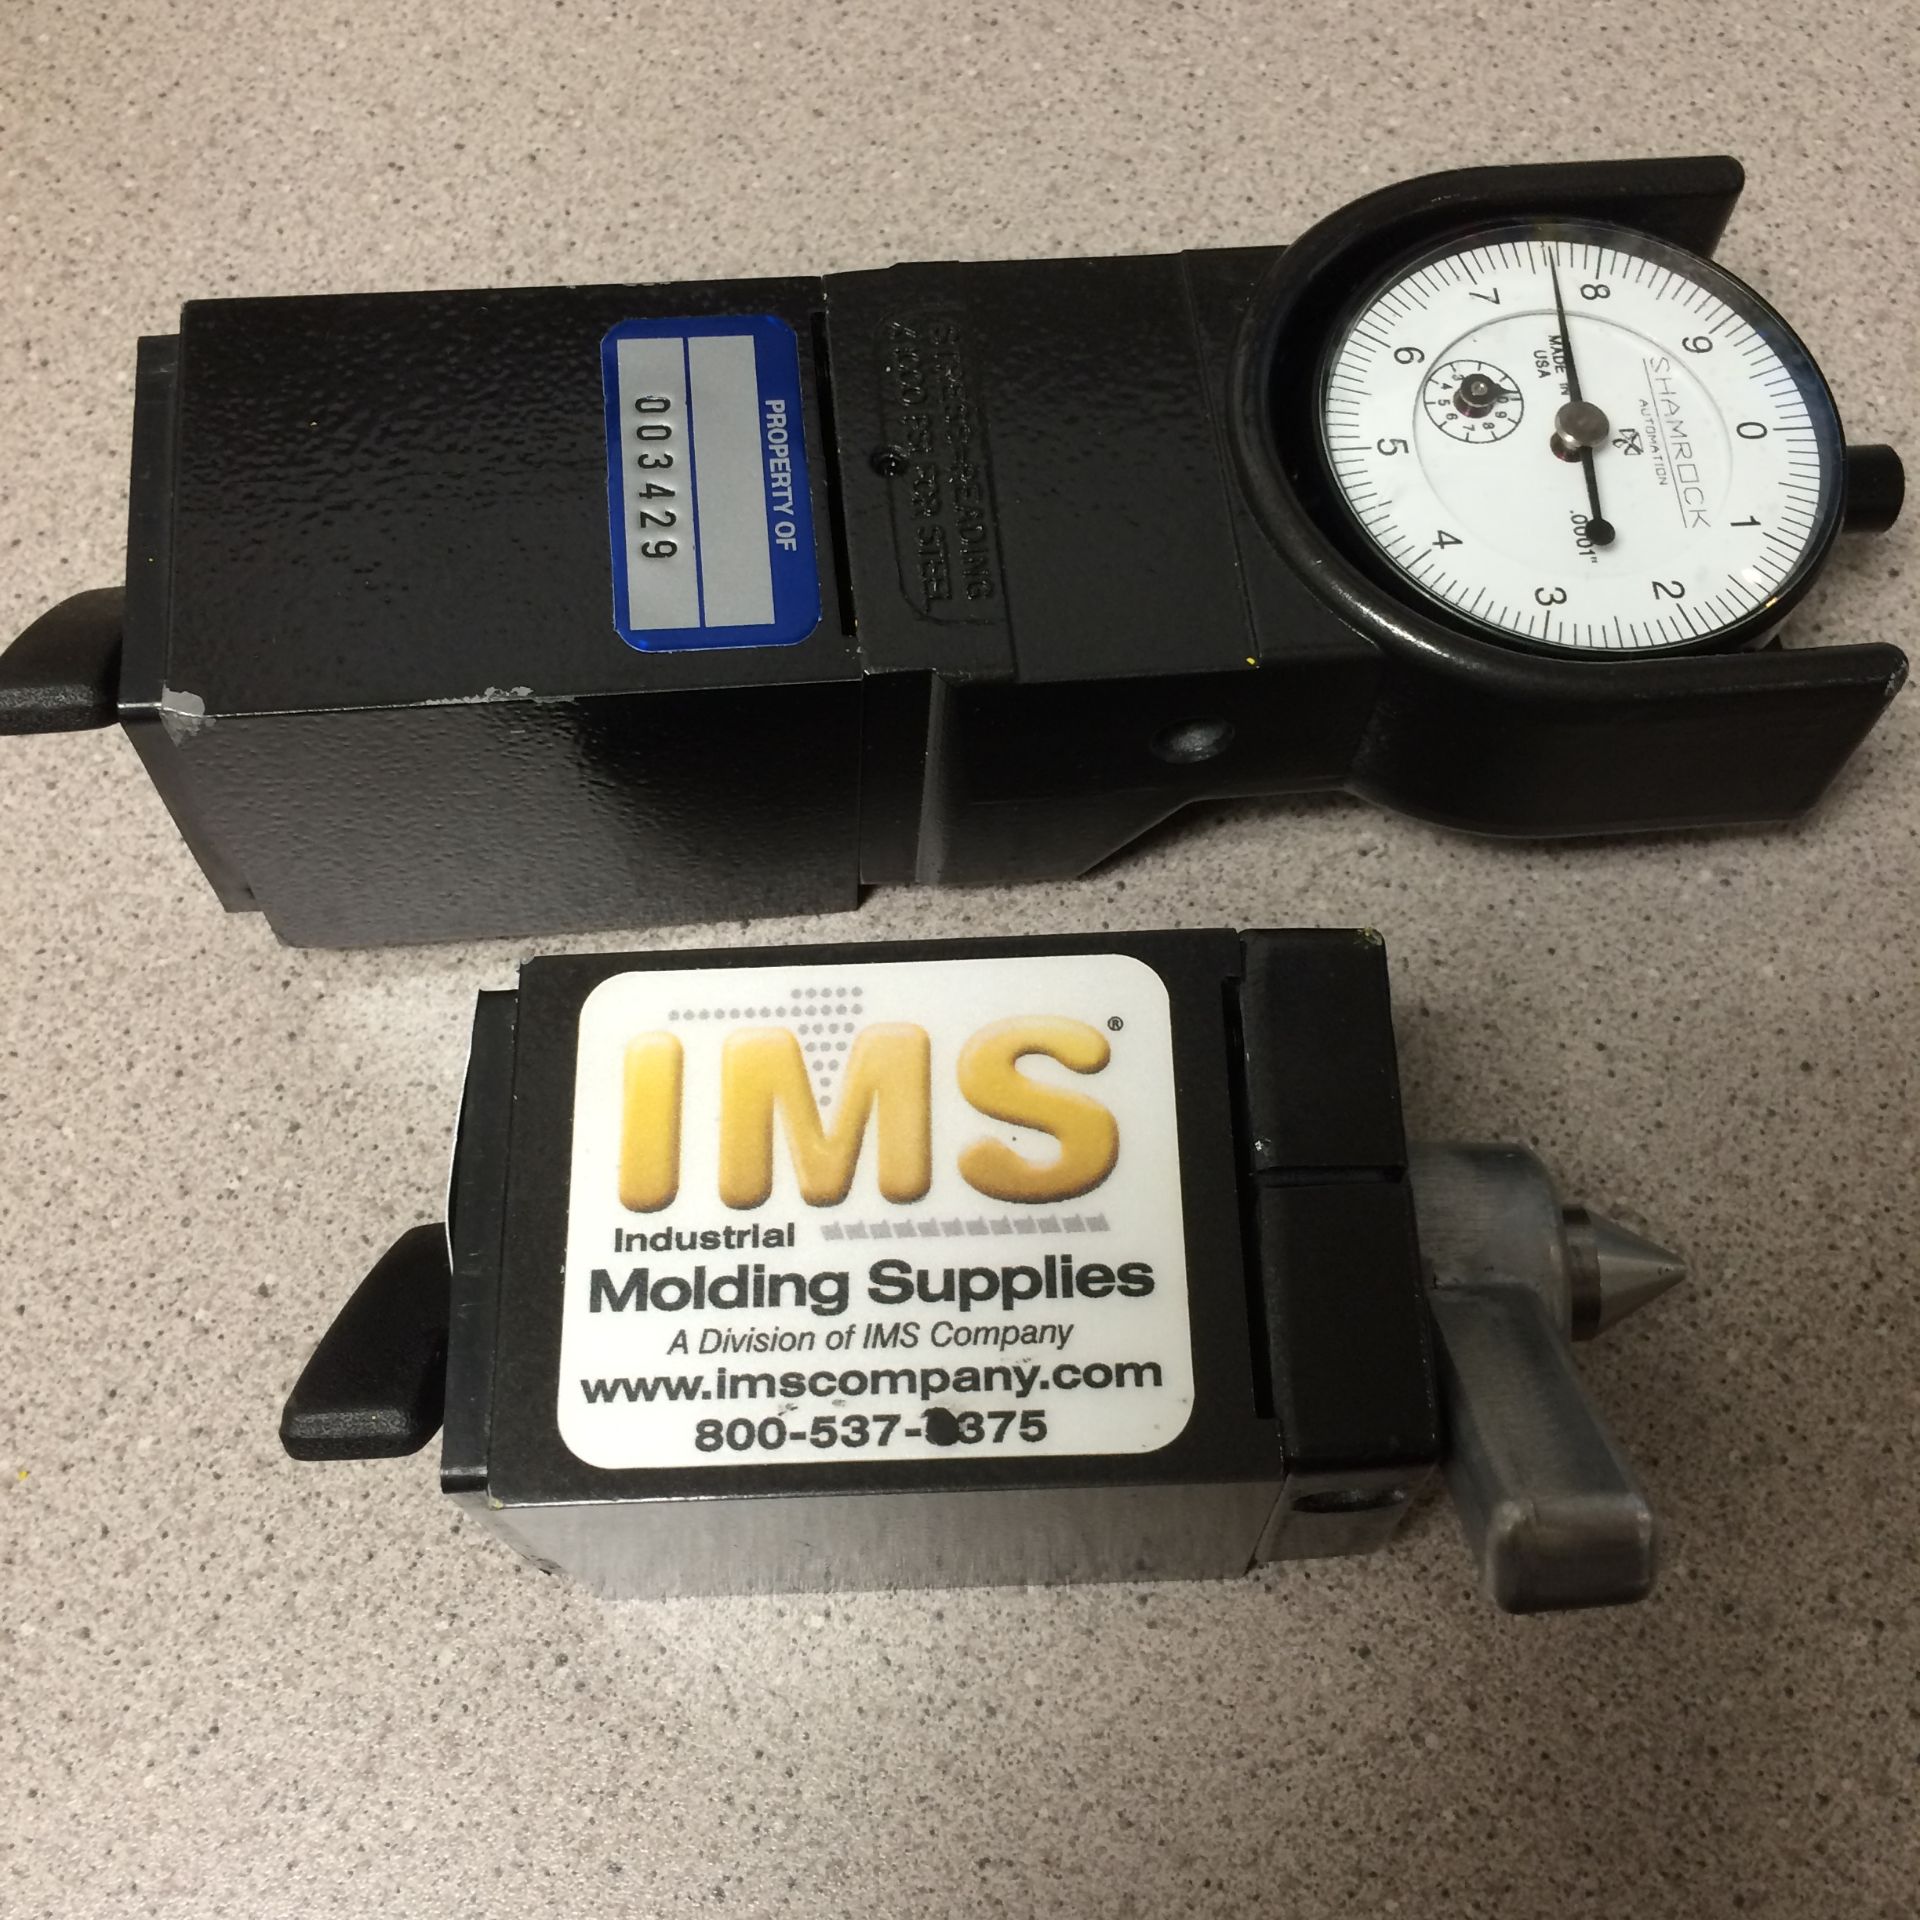 IMS Tie Bar Strain Guage Tester w/ Case for 125+ Ton Injection Molding Machines - Image 2 of 4